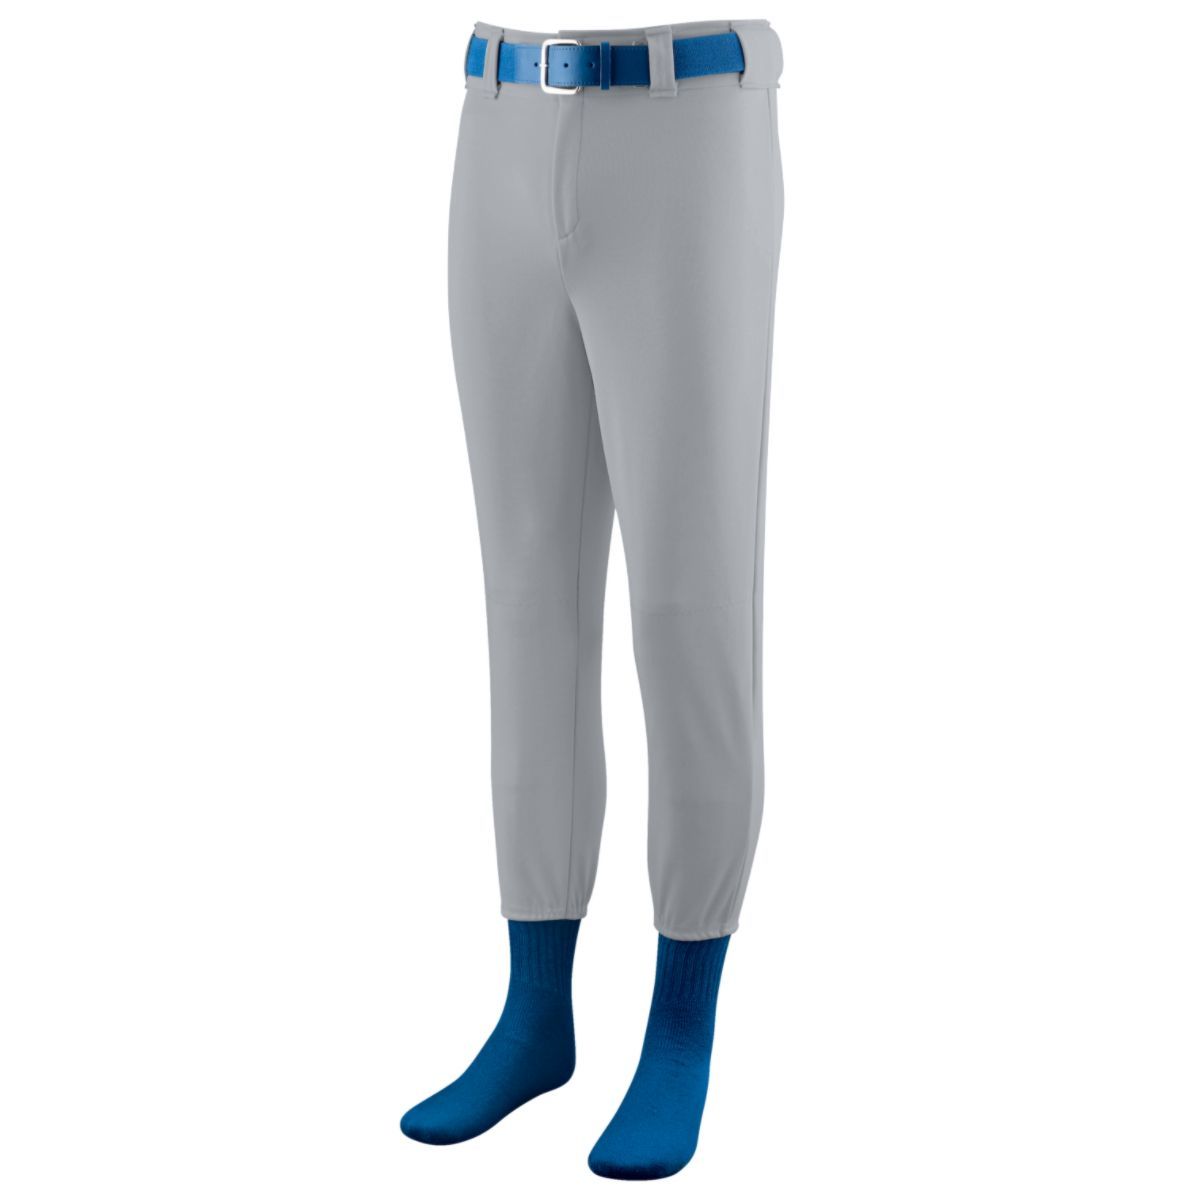 Augusta Sportswear Youth Softball/Baseball Pant in Silver Grey  -Part of the Youth, Youth-Pants, Pants, Augusta-Products, Softball product lines at KanaleyCreations.com